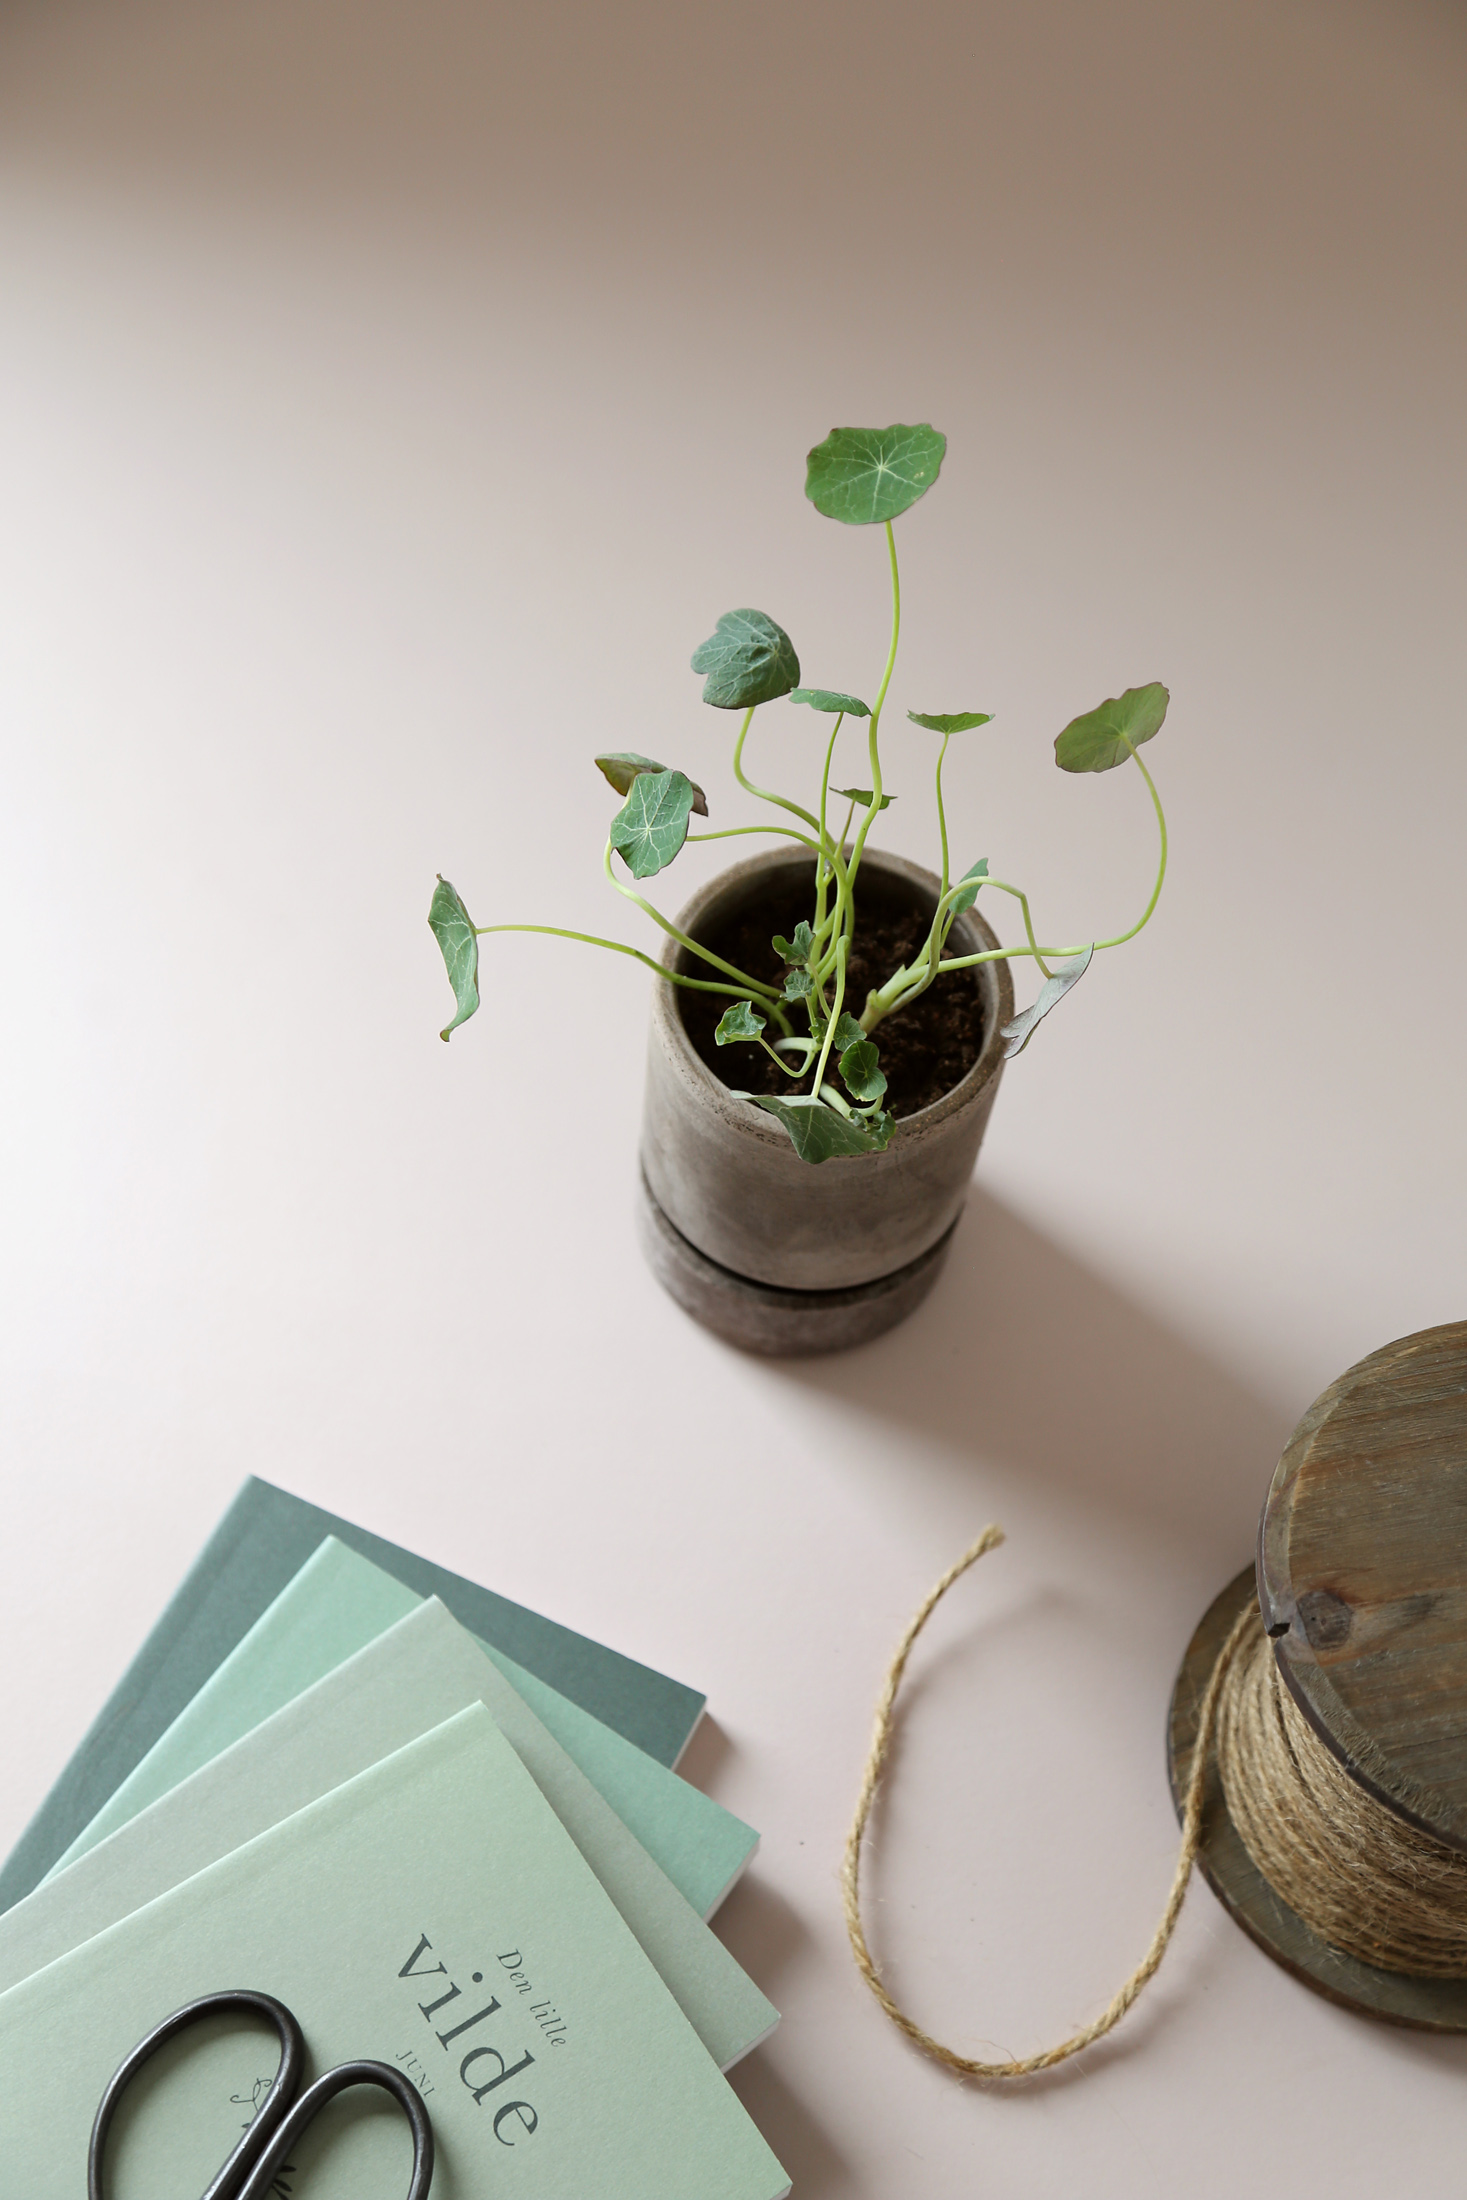 Small Hoff pot with plant next to scissor and book on table